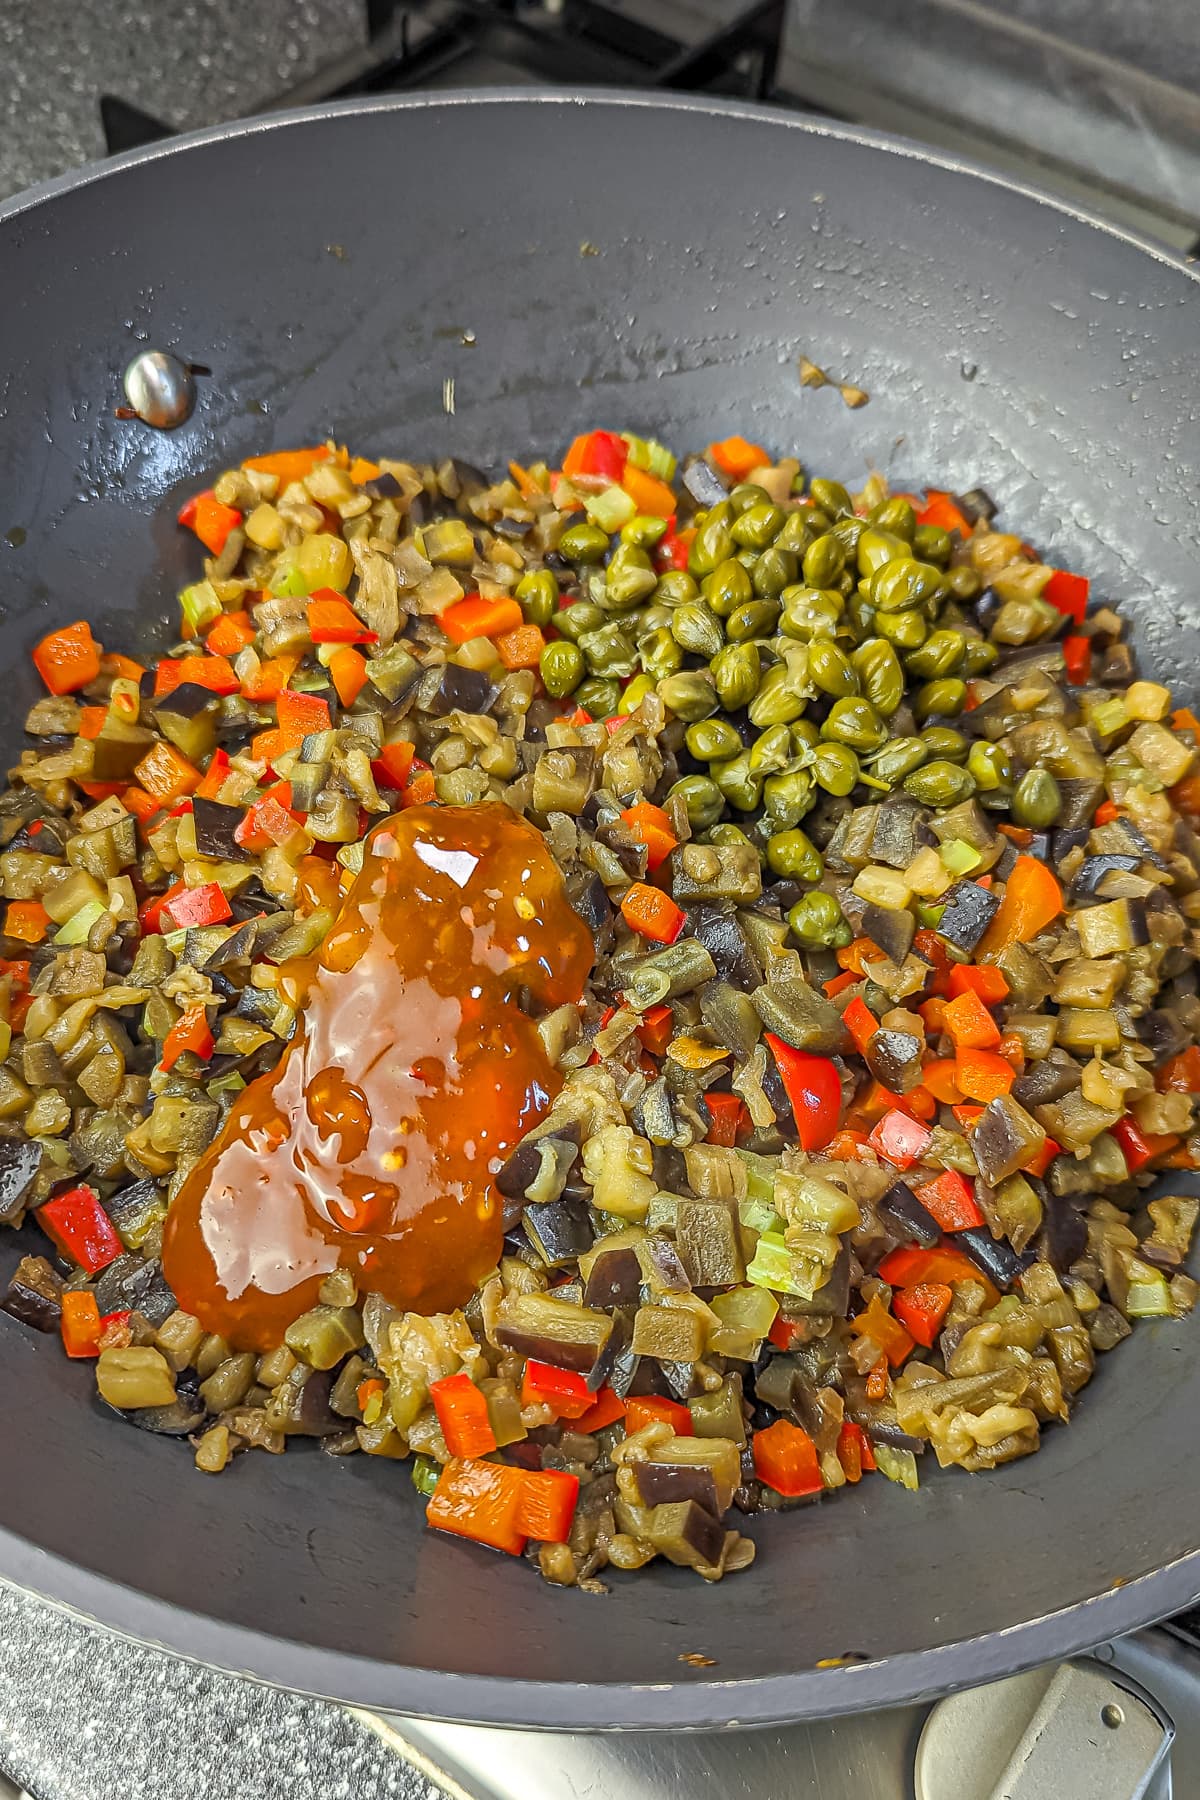 Capers and red sauce introduced to the pan of sautéed vegetables.